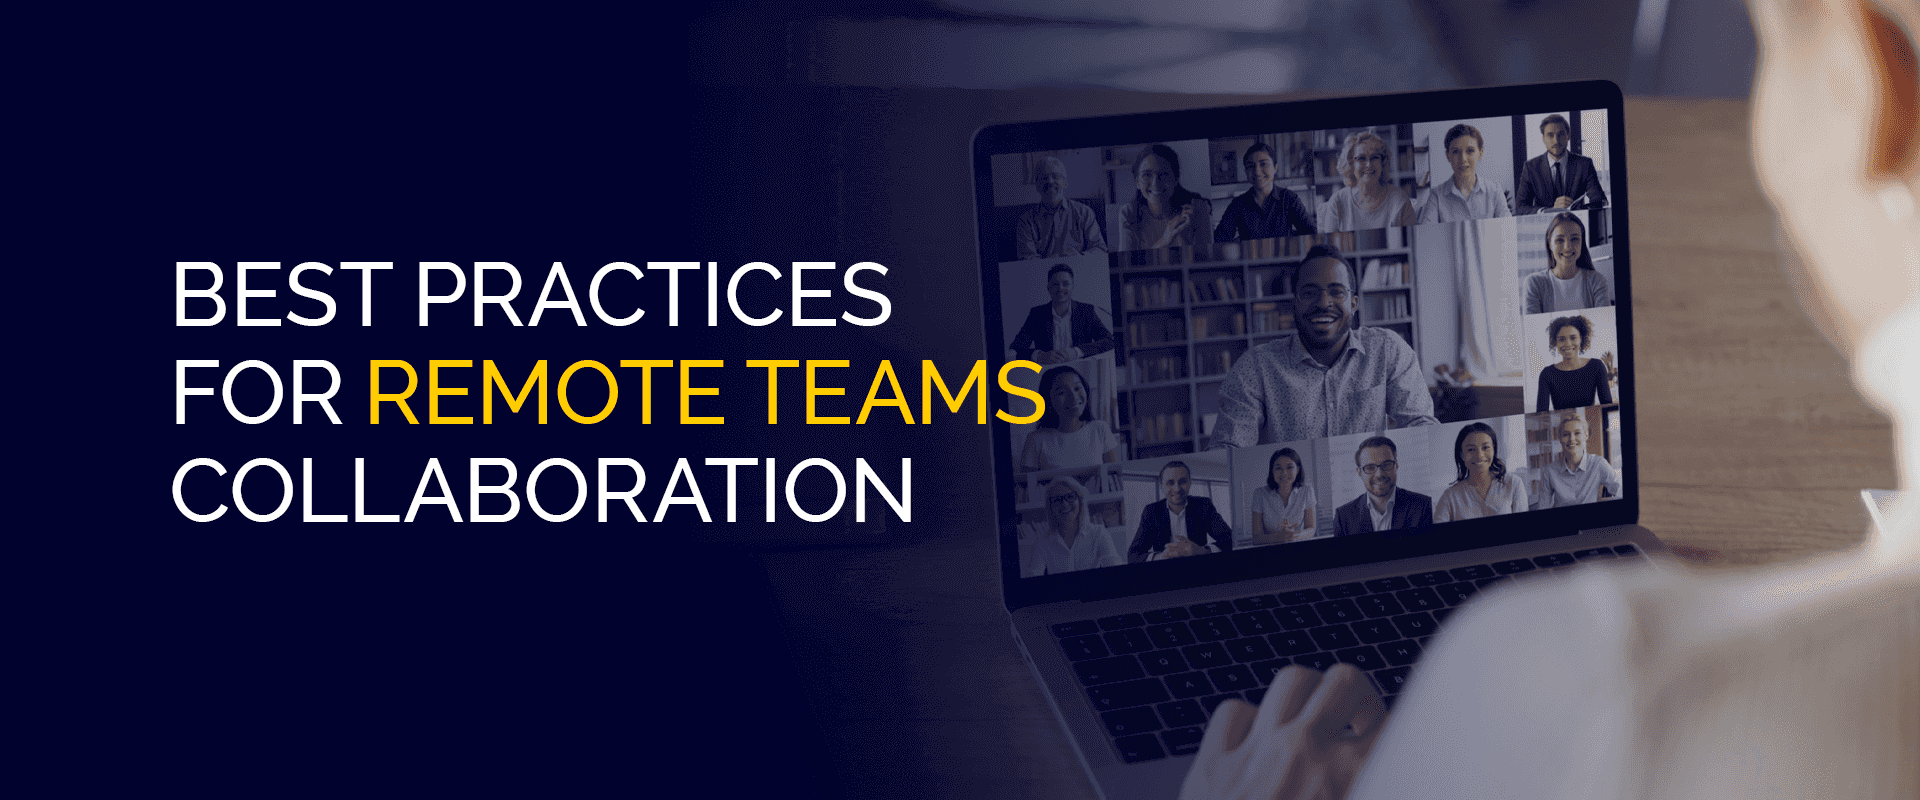 Best Practices for Remote Teams Collaboration